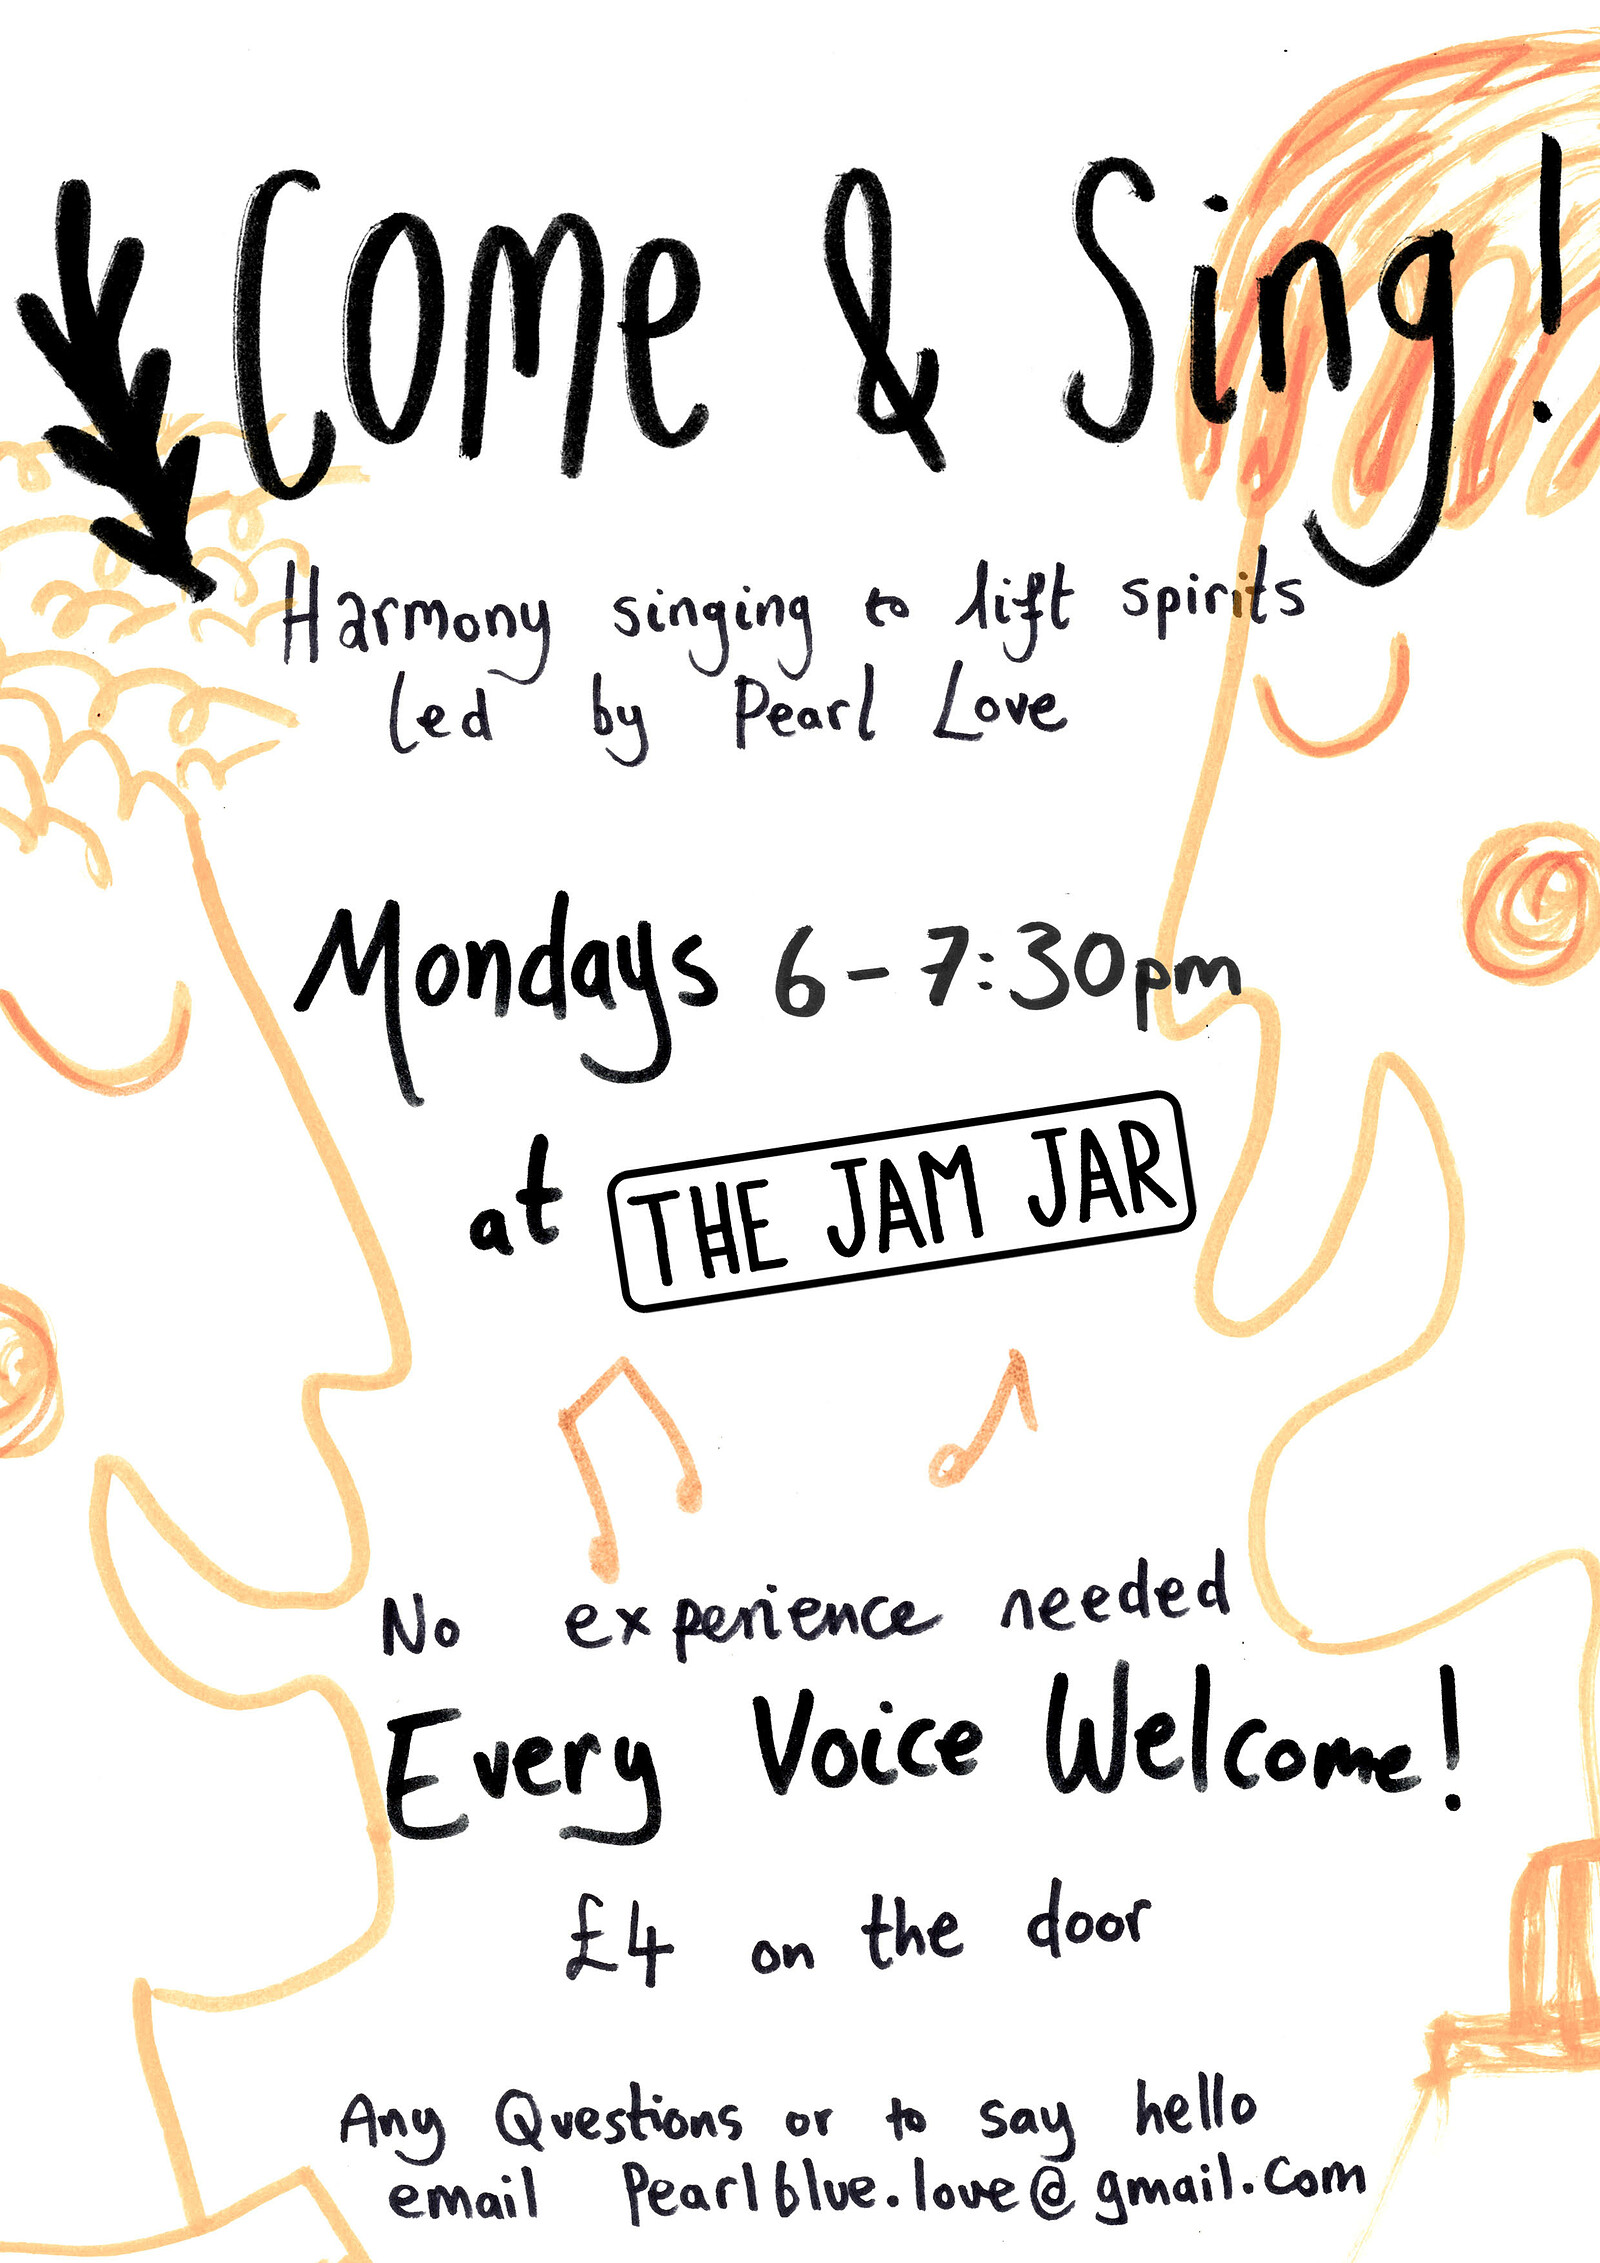 Come and Sing Drop in choir at The Jam Jar